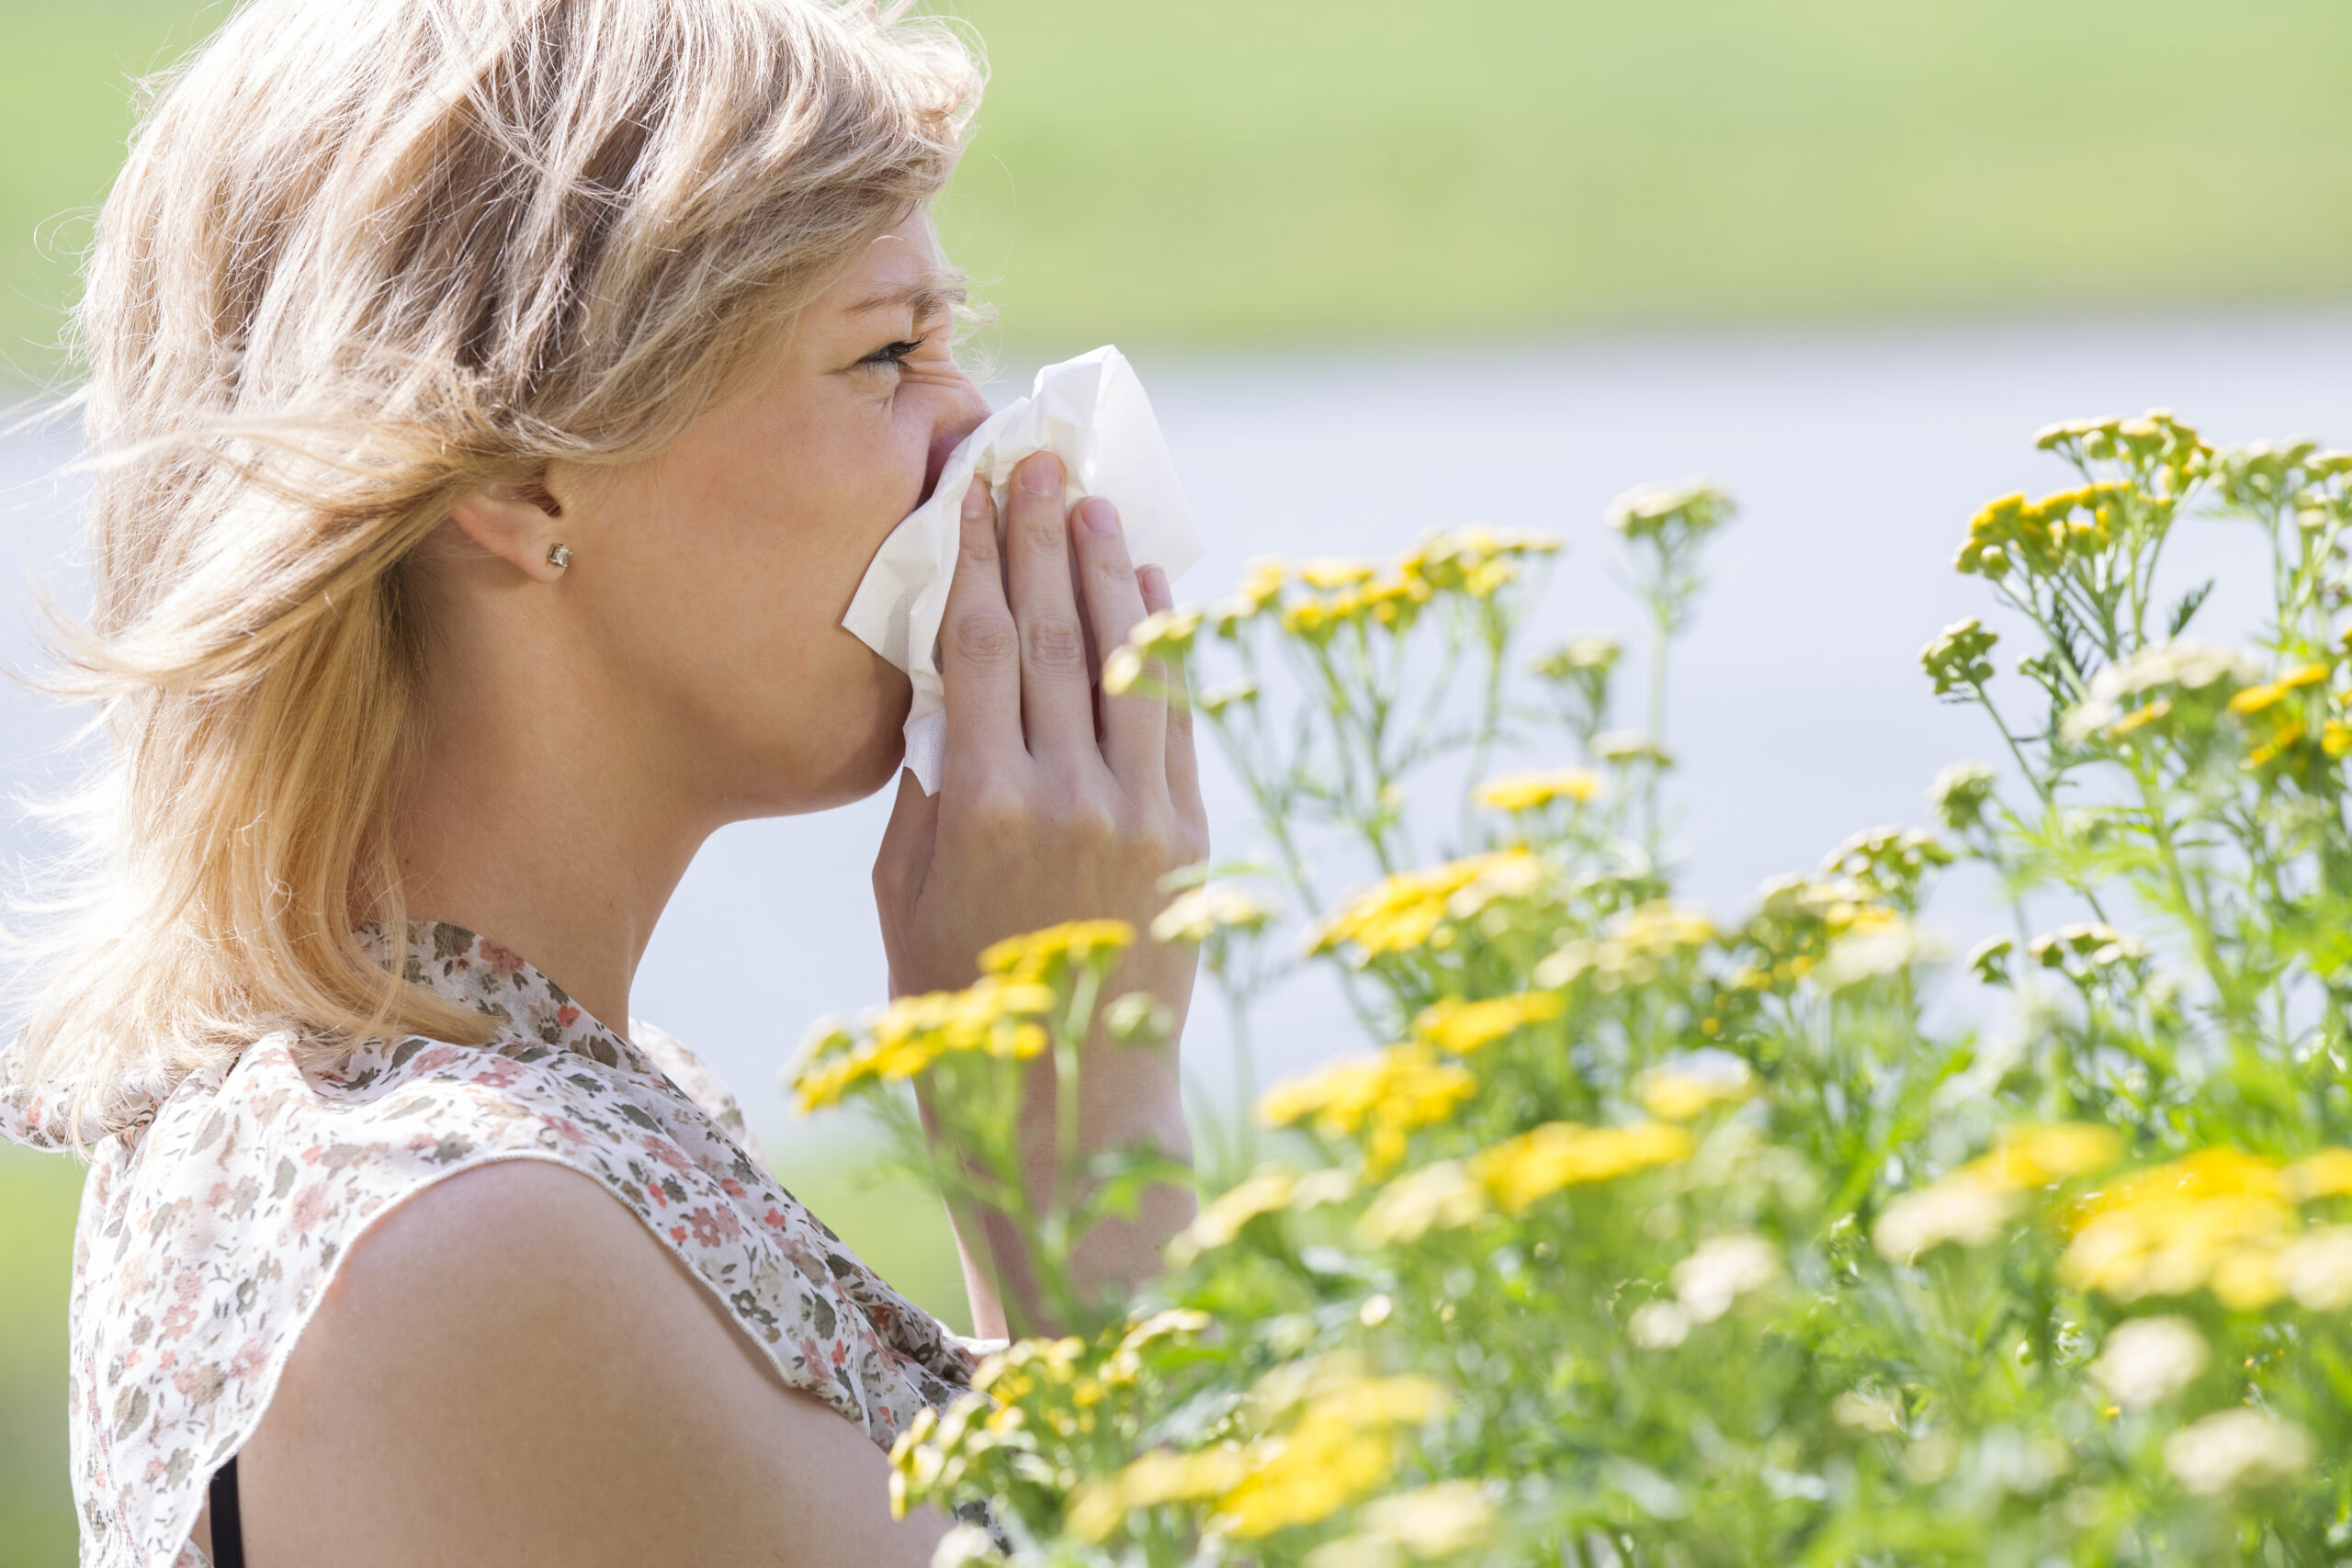 Side view of woman blowing nose into tissue in front of flowers. Pressure Washing Pollen